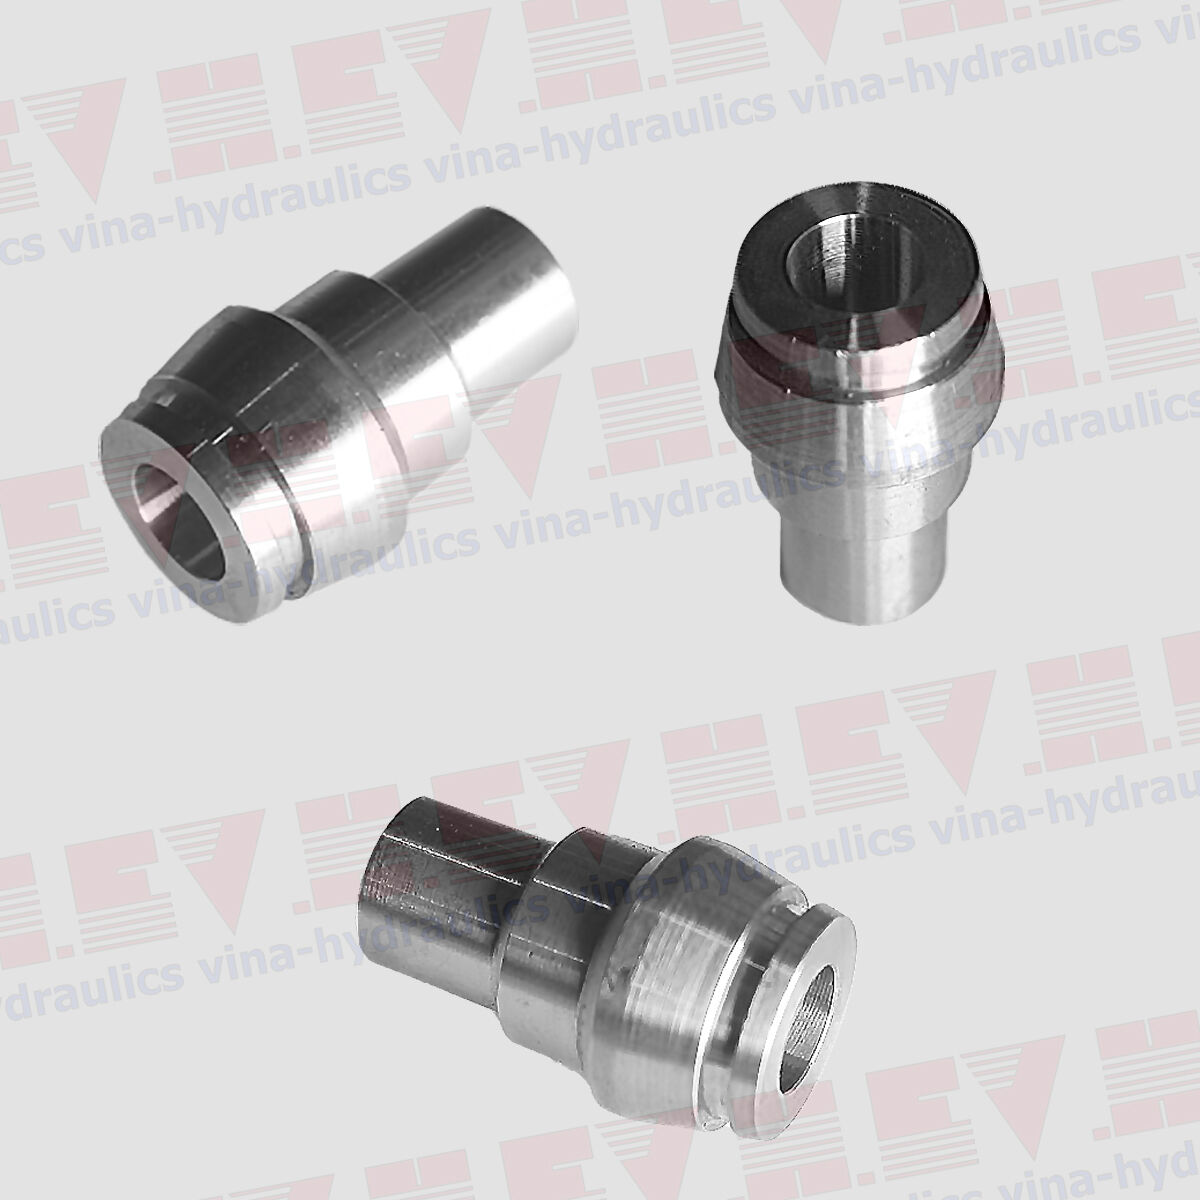 Reduced-level welding nipple SS316 at cheap price